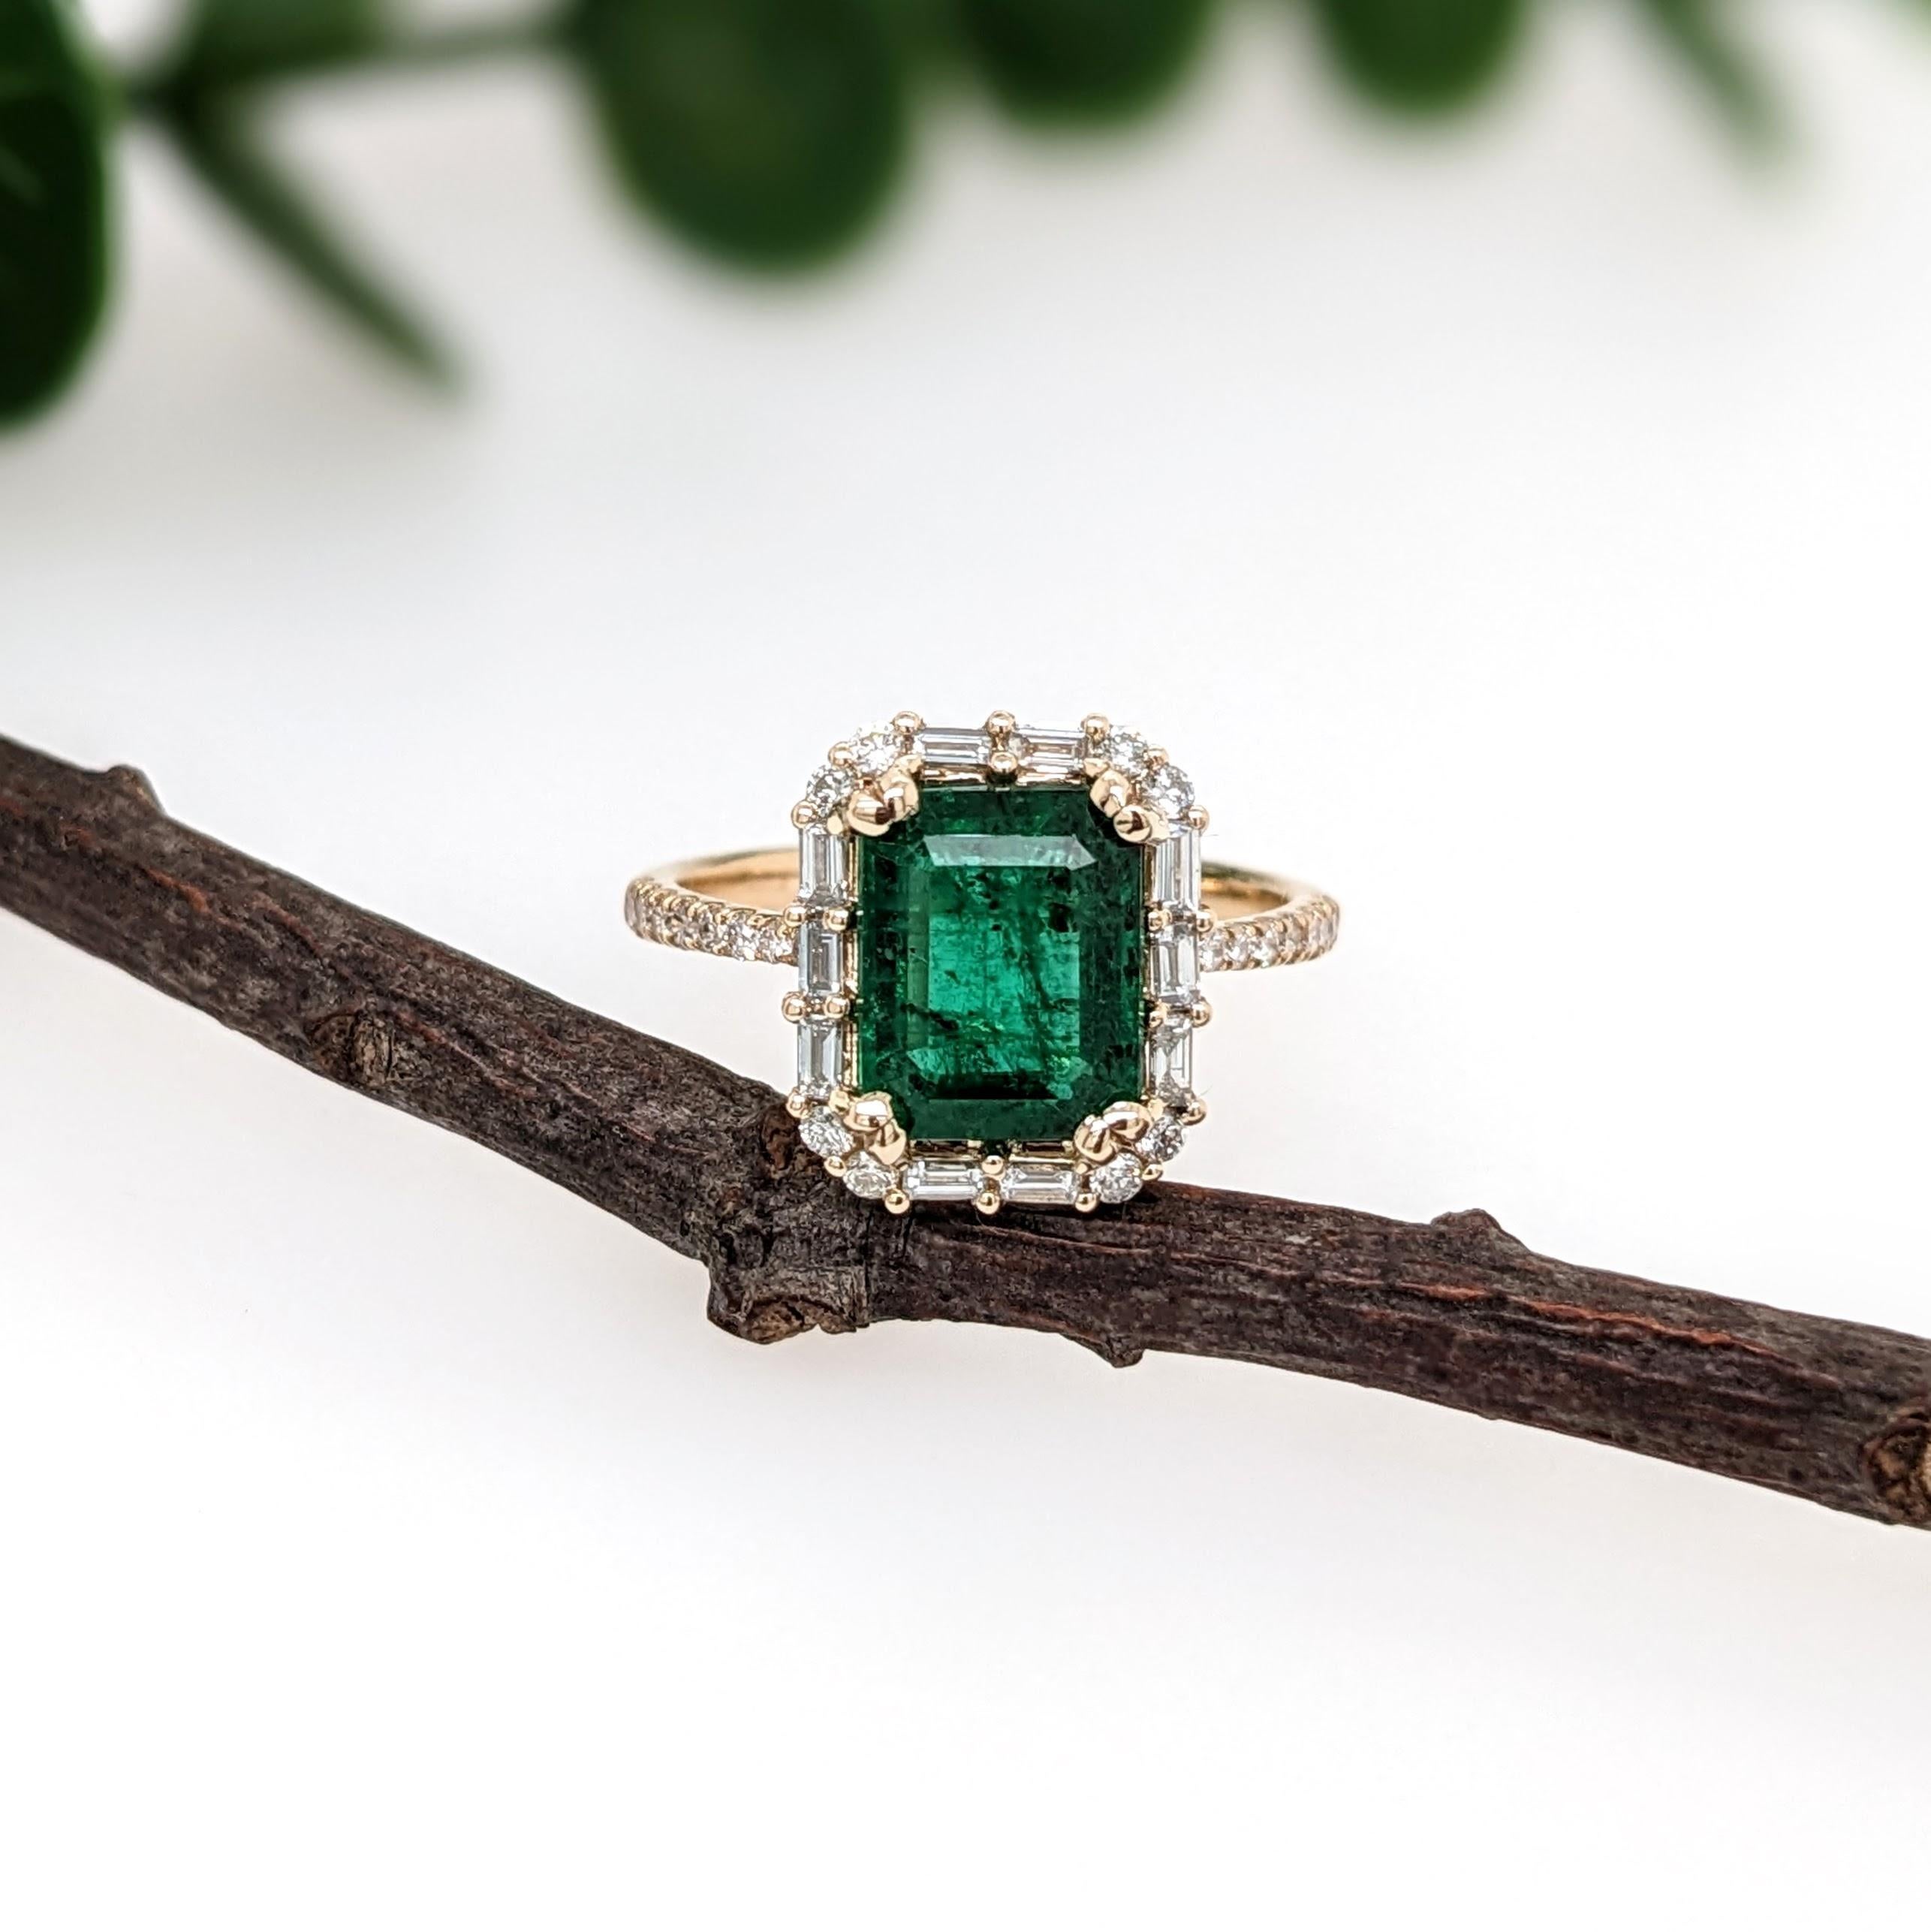 This statement ring has a vintage style Emerald surrounded by natural round and baguette diamond accents. This ring is made with solid 14k yellow gold and can be customized to fit your needs! This ring also makes a beautiful May birthstone ring for